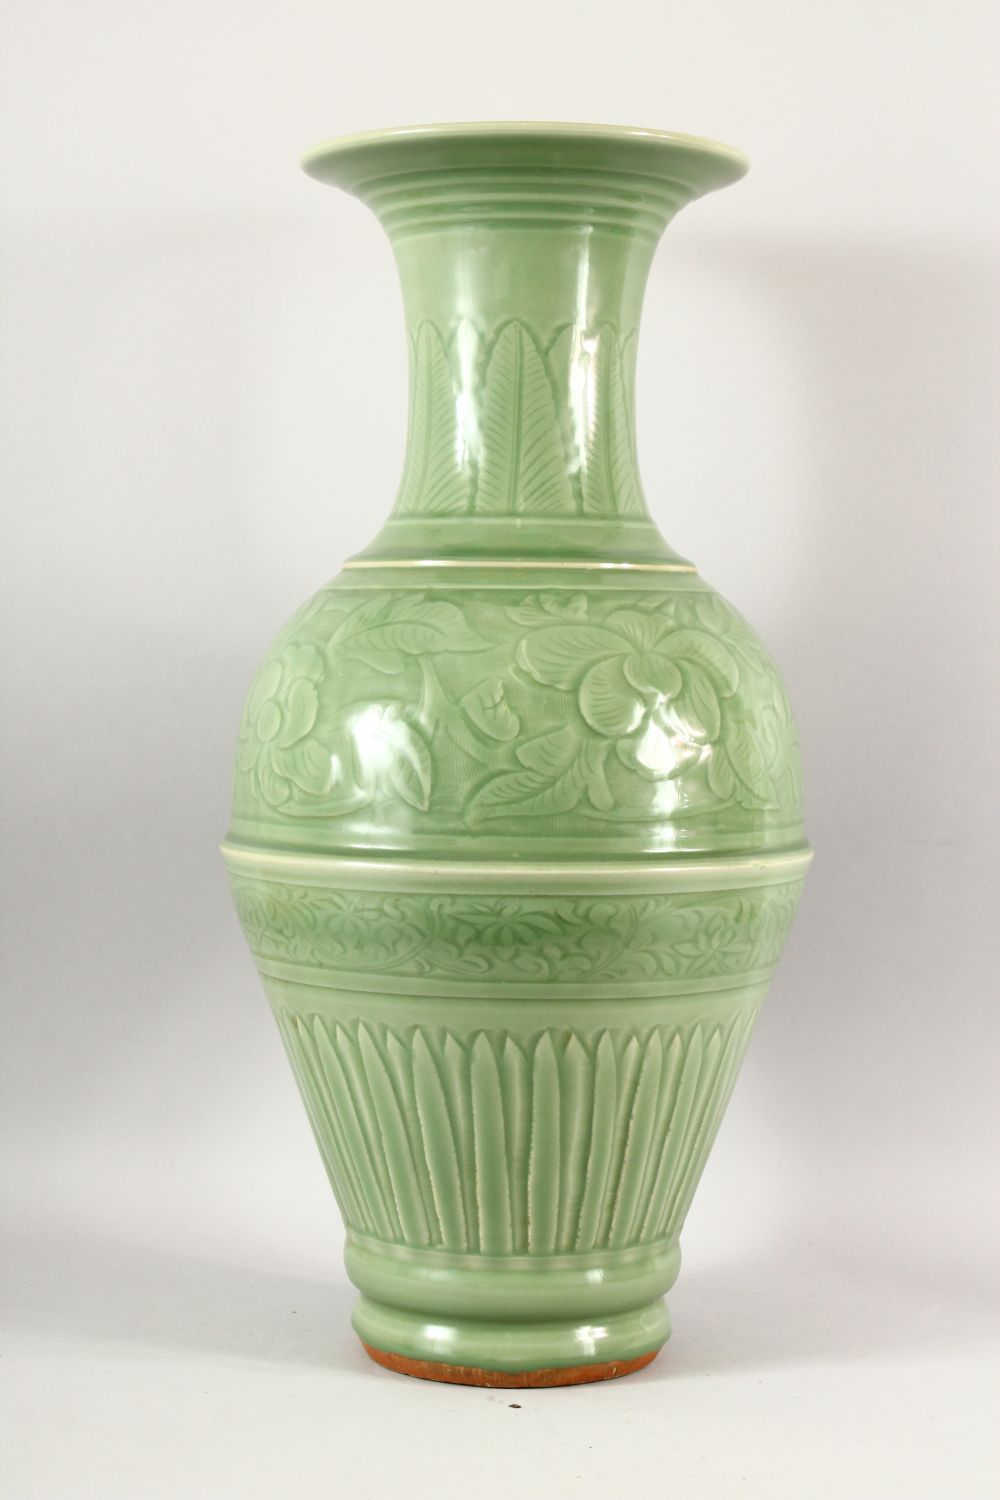 A VERY GOOD LARGE CHINESE CELADON VASE, with panels of flowers and fluted base, 64cm high. - Image 4 of 6